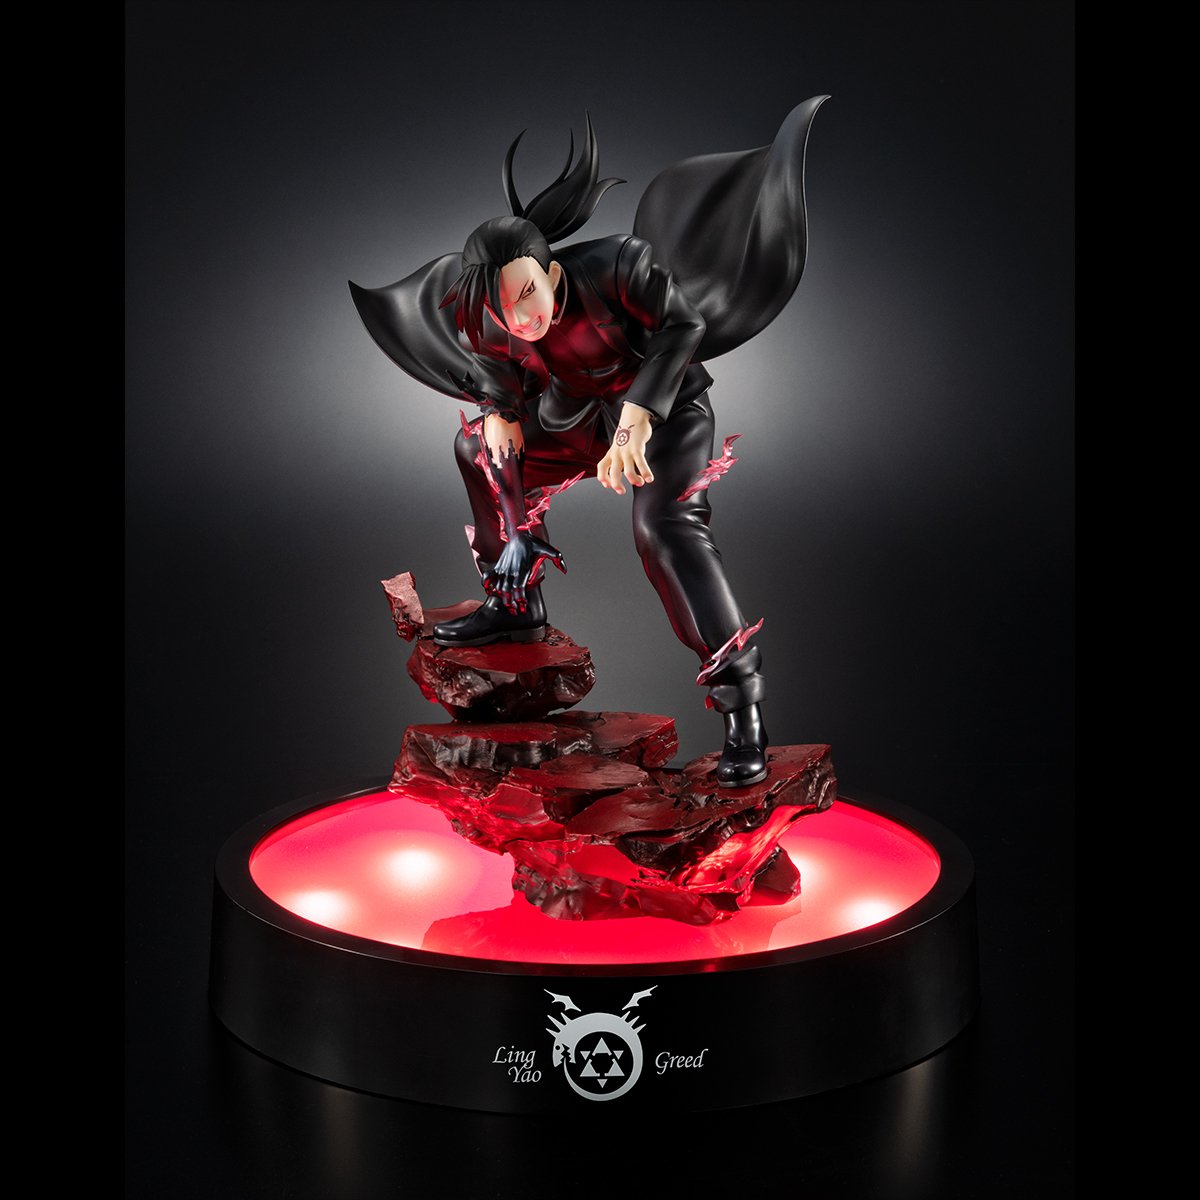 Fullmetal Alchemist: Brotherhood - Ling Yao (Greed) Precious G.E.M. Figure (with LED Stand) image count 0